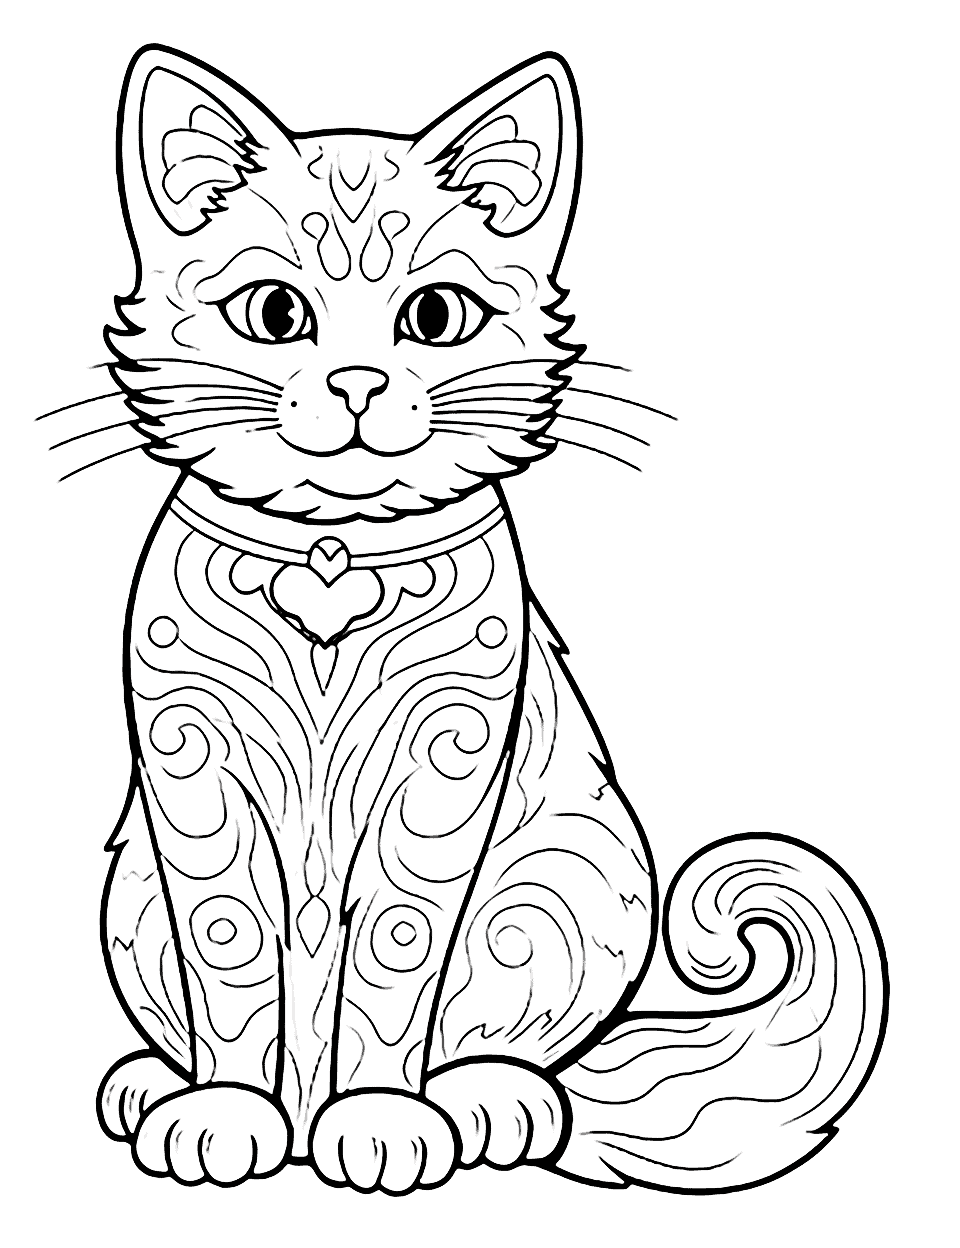 Advanced Mystical Cat Coloring Page - An advanced coloring page of a cat with mystical symbols and patterns on its fur.